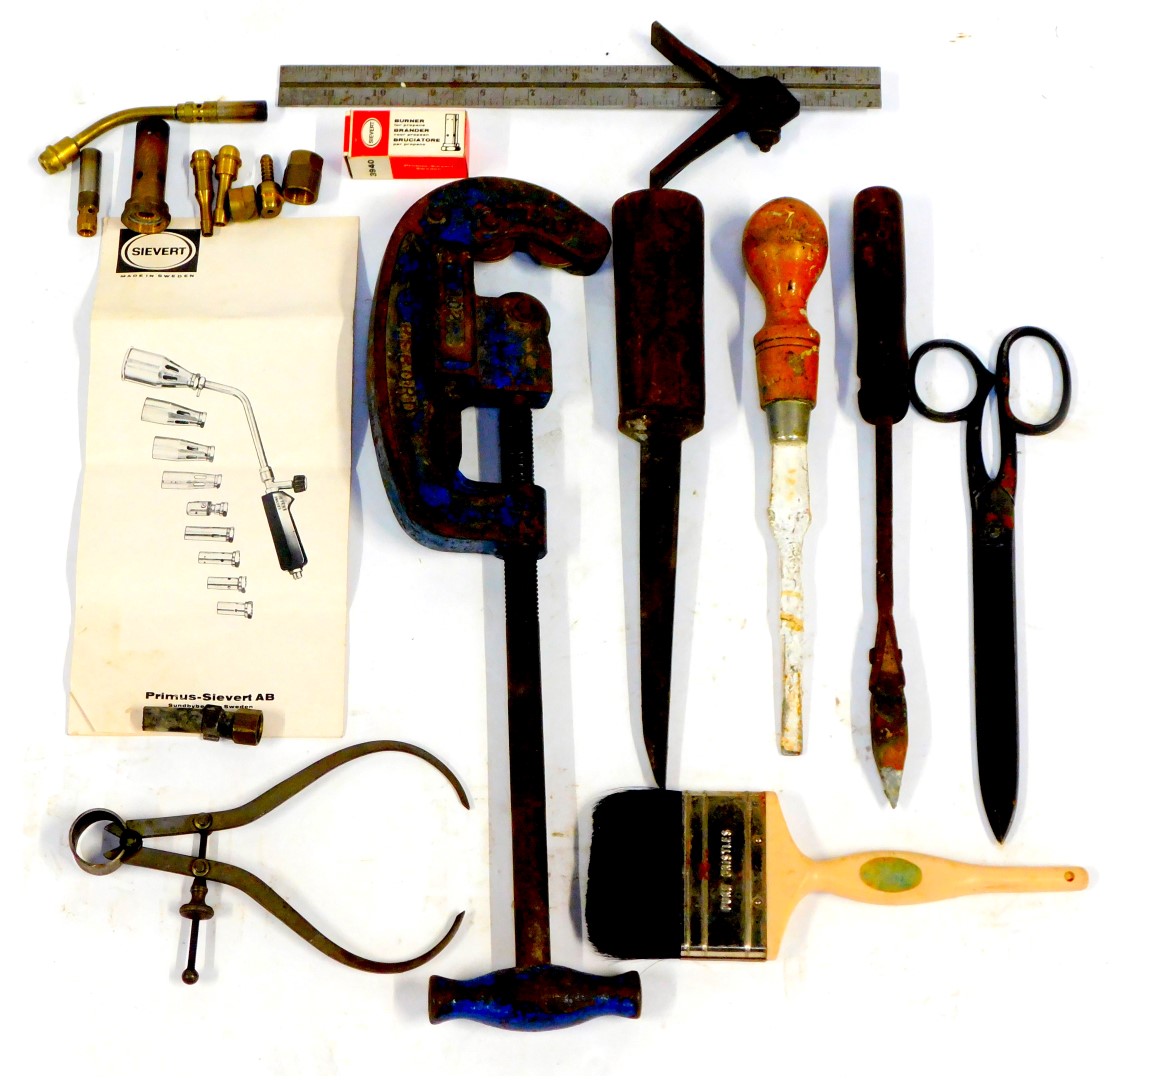 Engineering tools, comprising chisels, a Record sash clamp, calipers, clippers, etc. (1 tray)